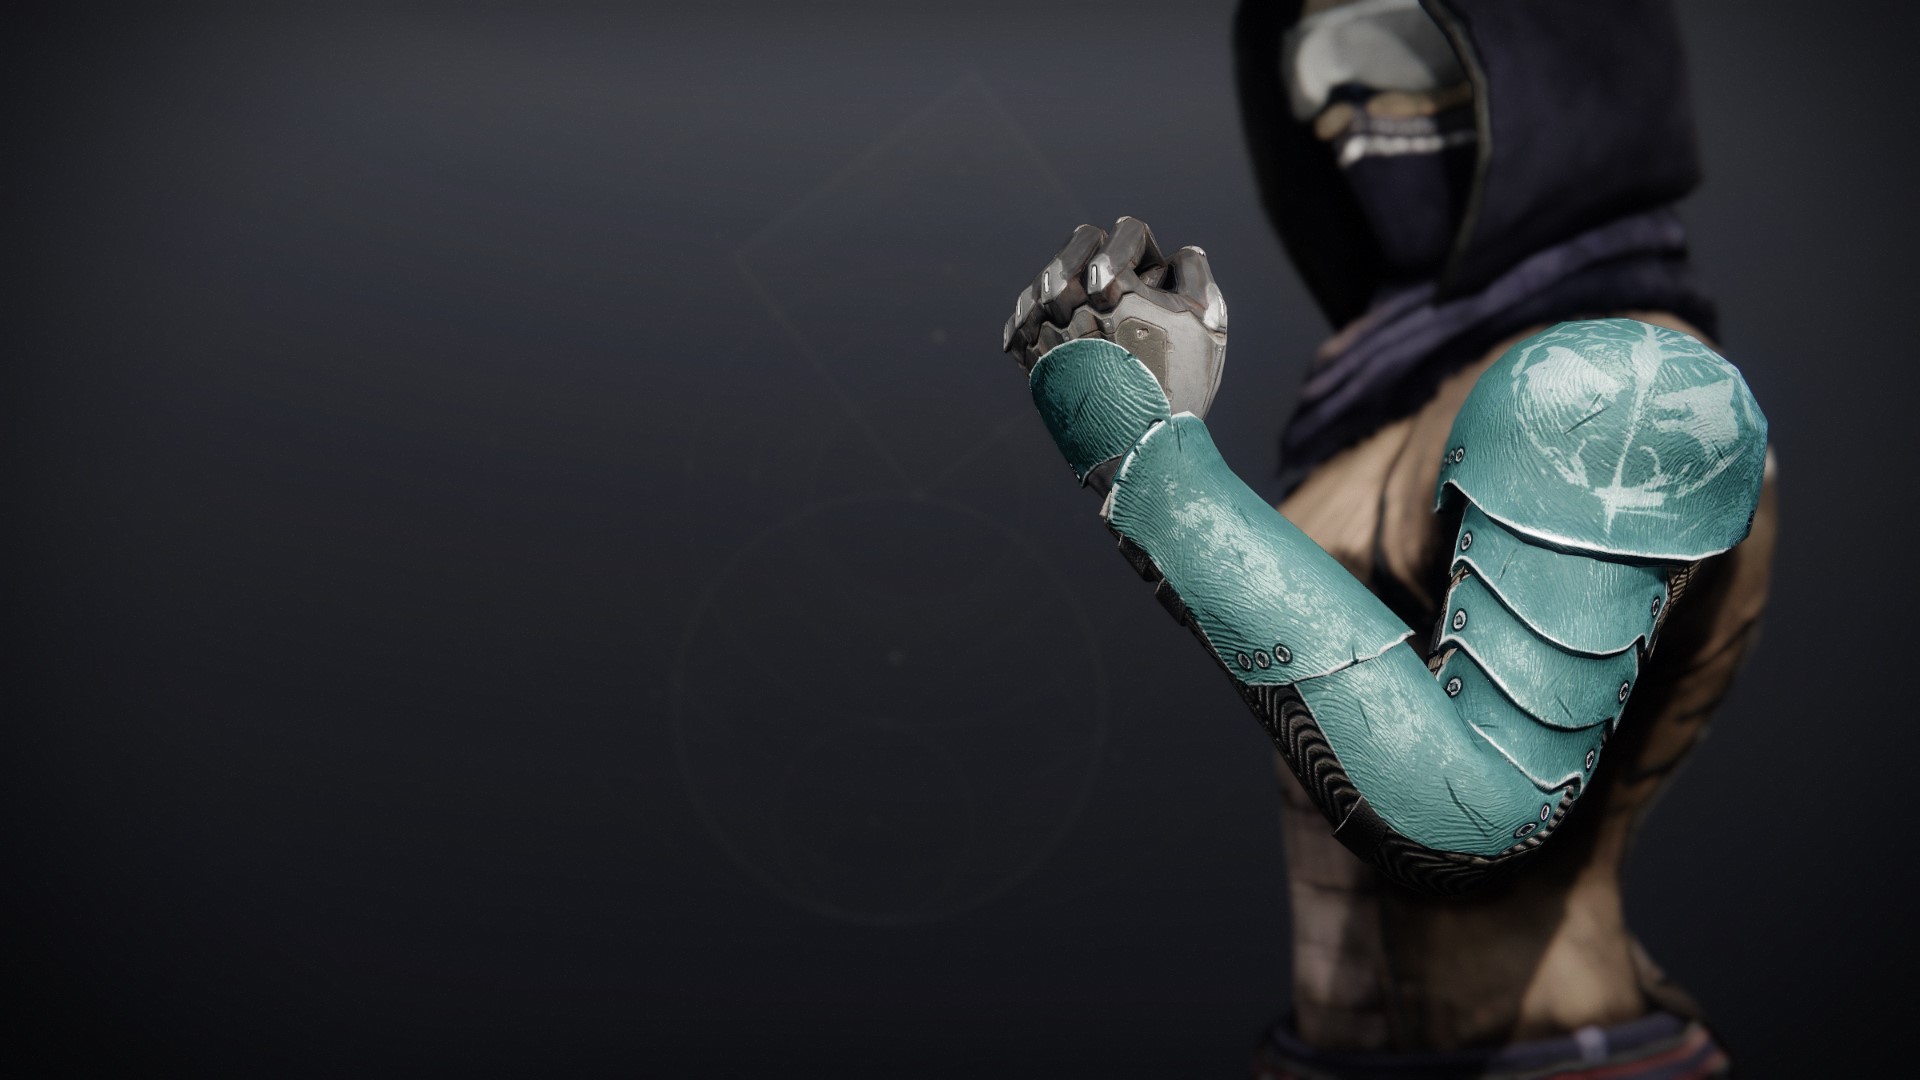 An in-game render of the Iron Forerunner Grips.